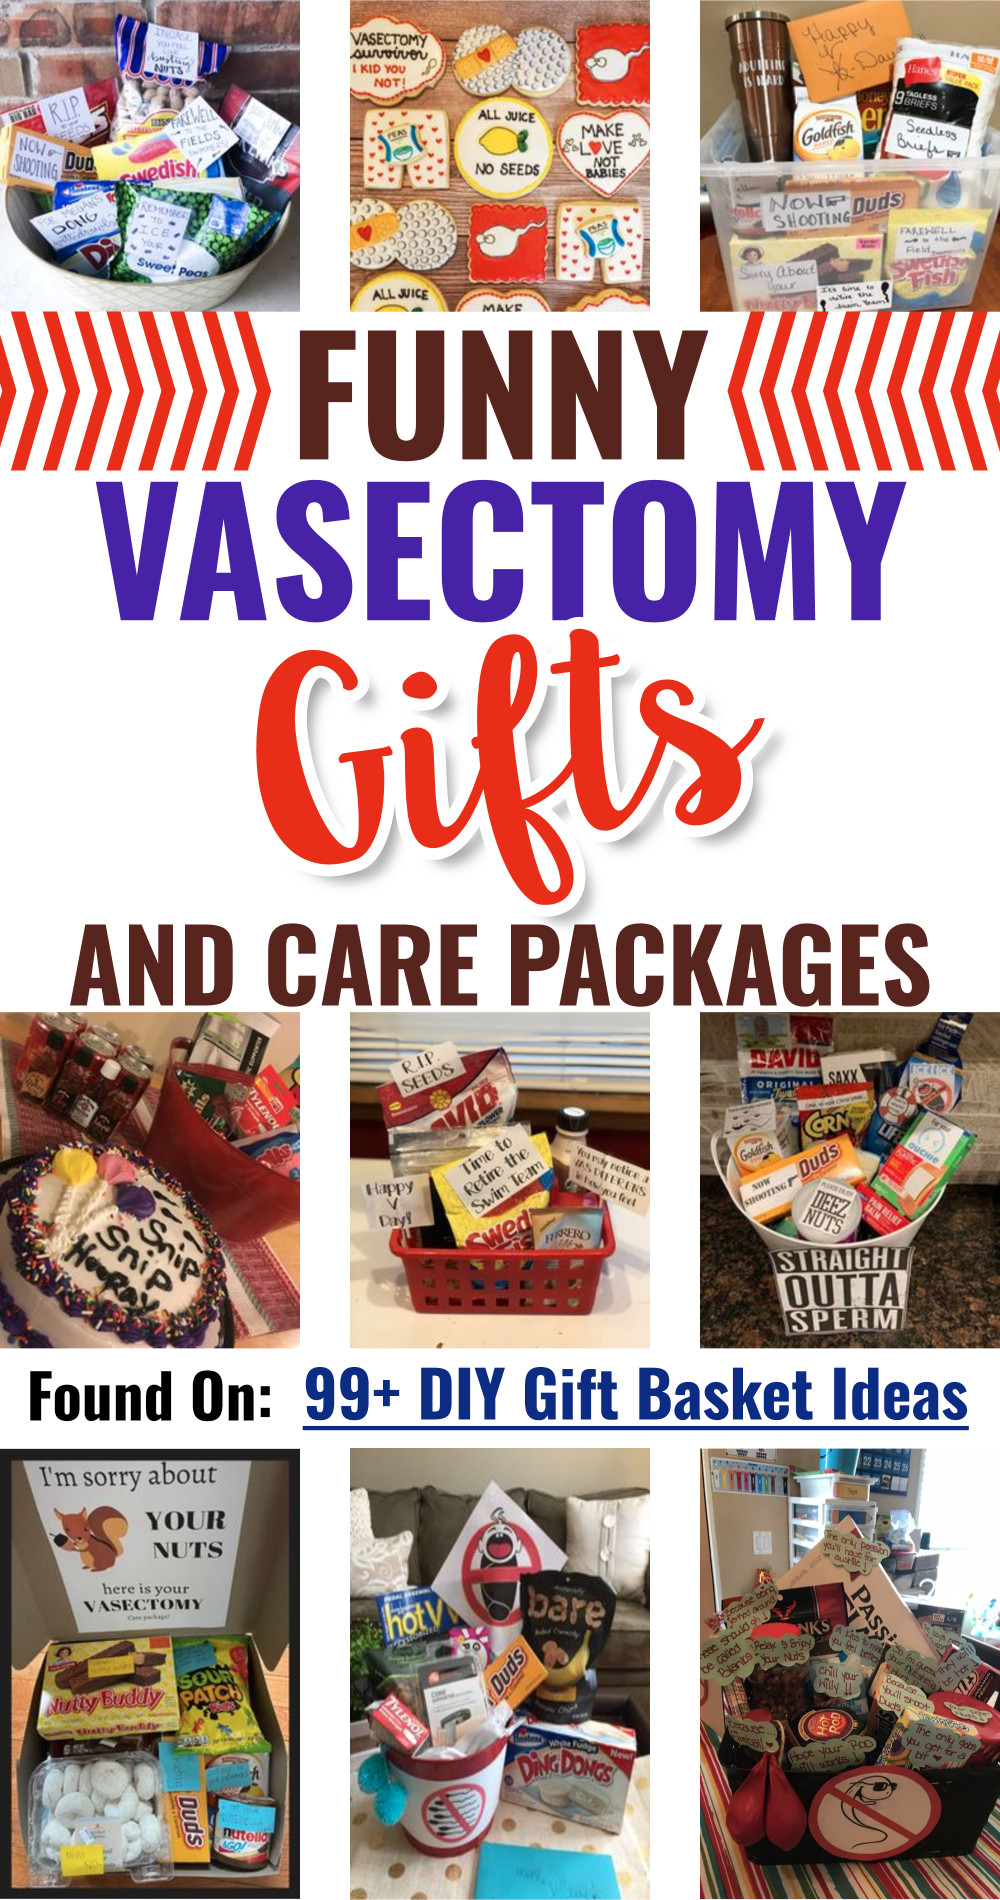 Funny Vasectomy Gifts